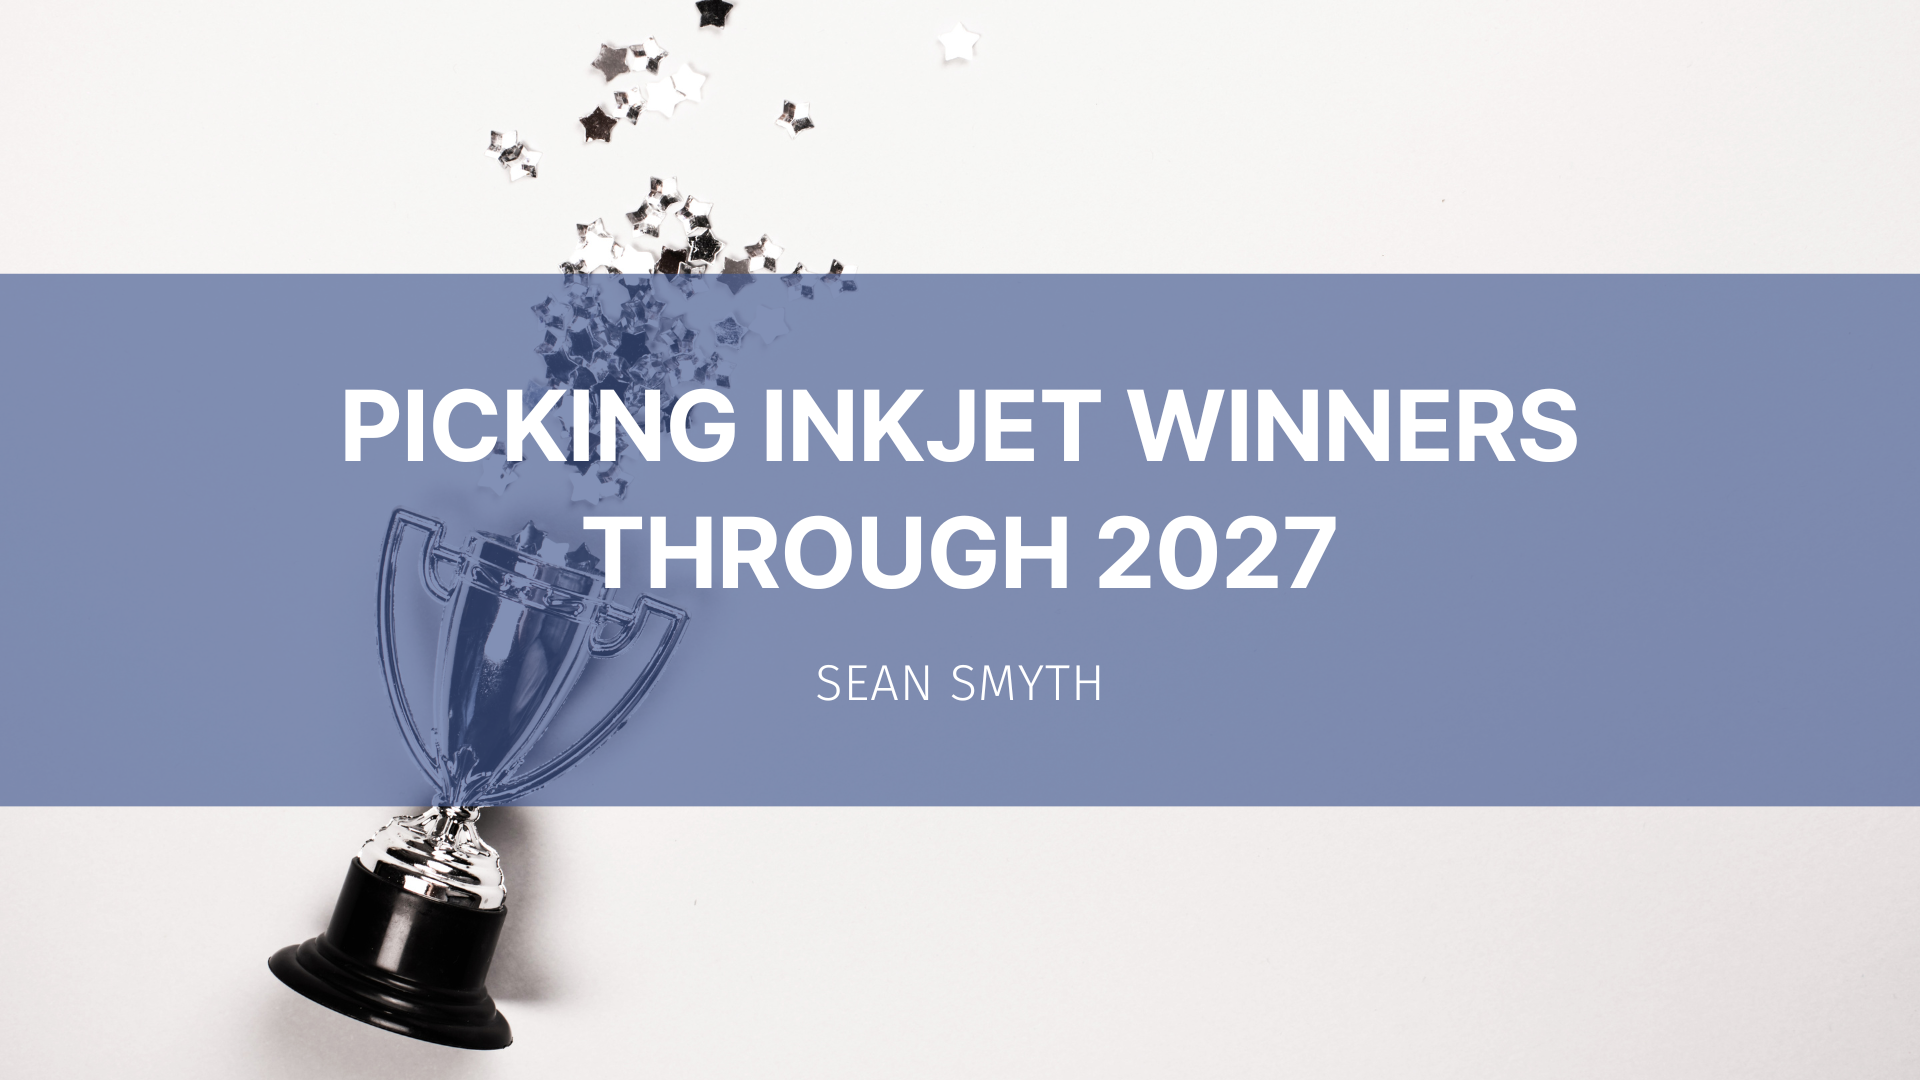 Picking inkjet winners through 2027 article cover image featuring a trophy filled with glitter and white text